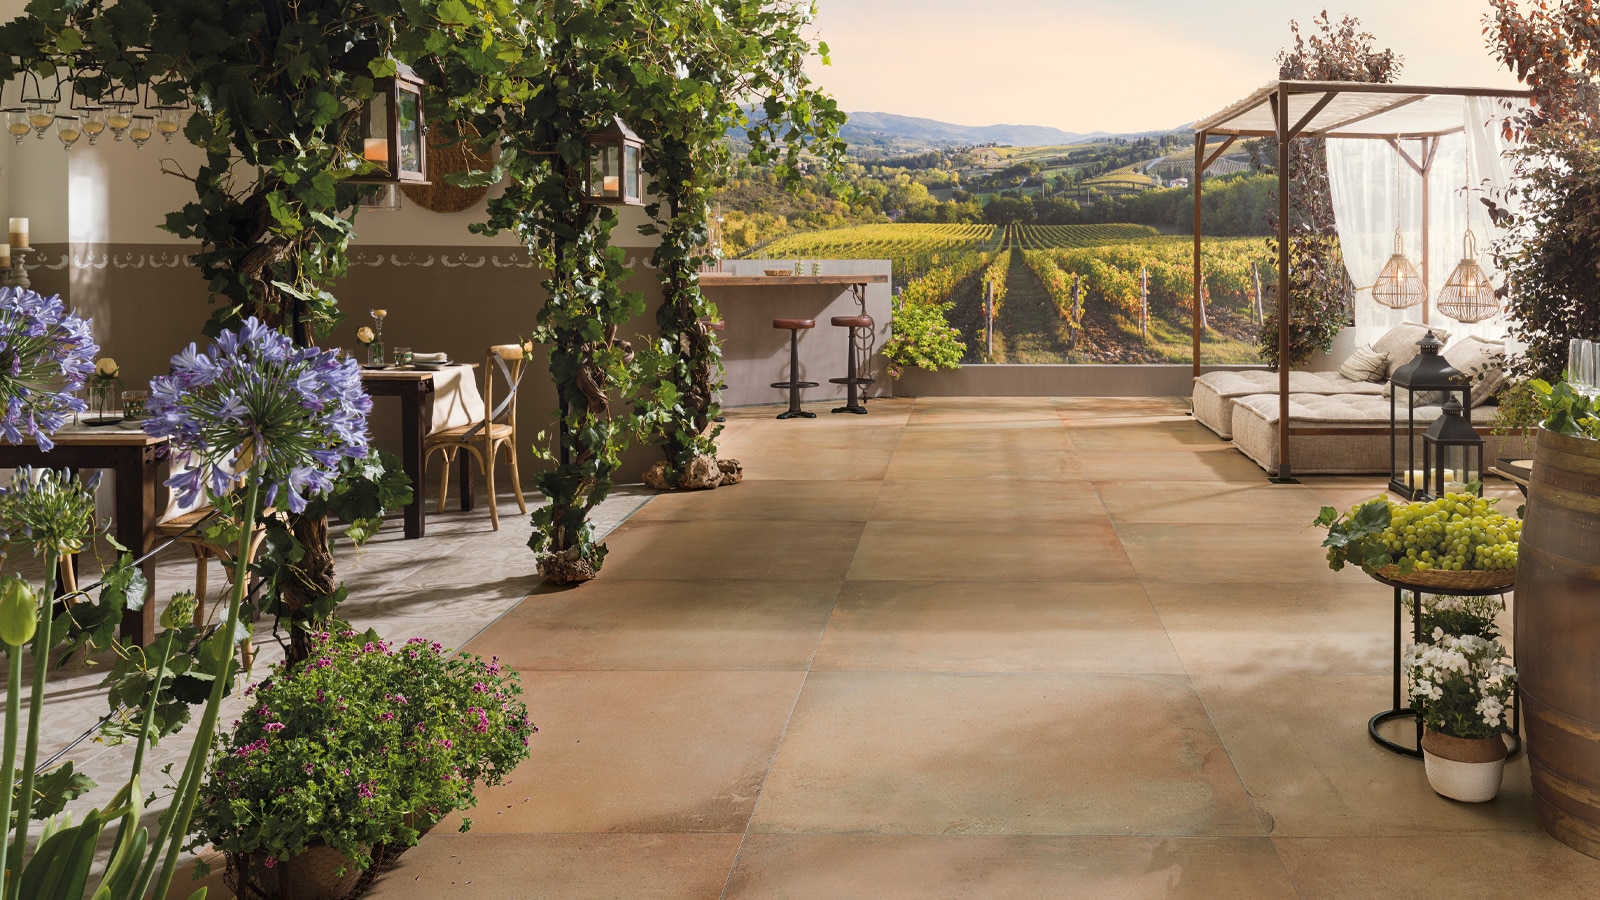 PORCELANOSA meets Tuscany, a majestic villa with countryside views